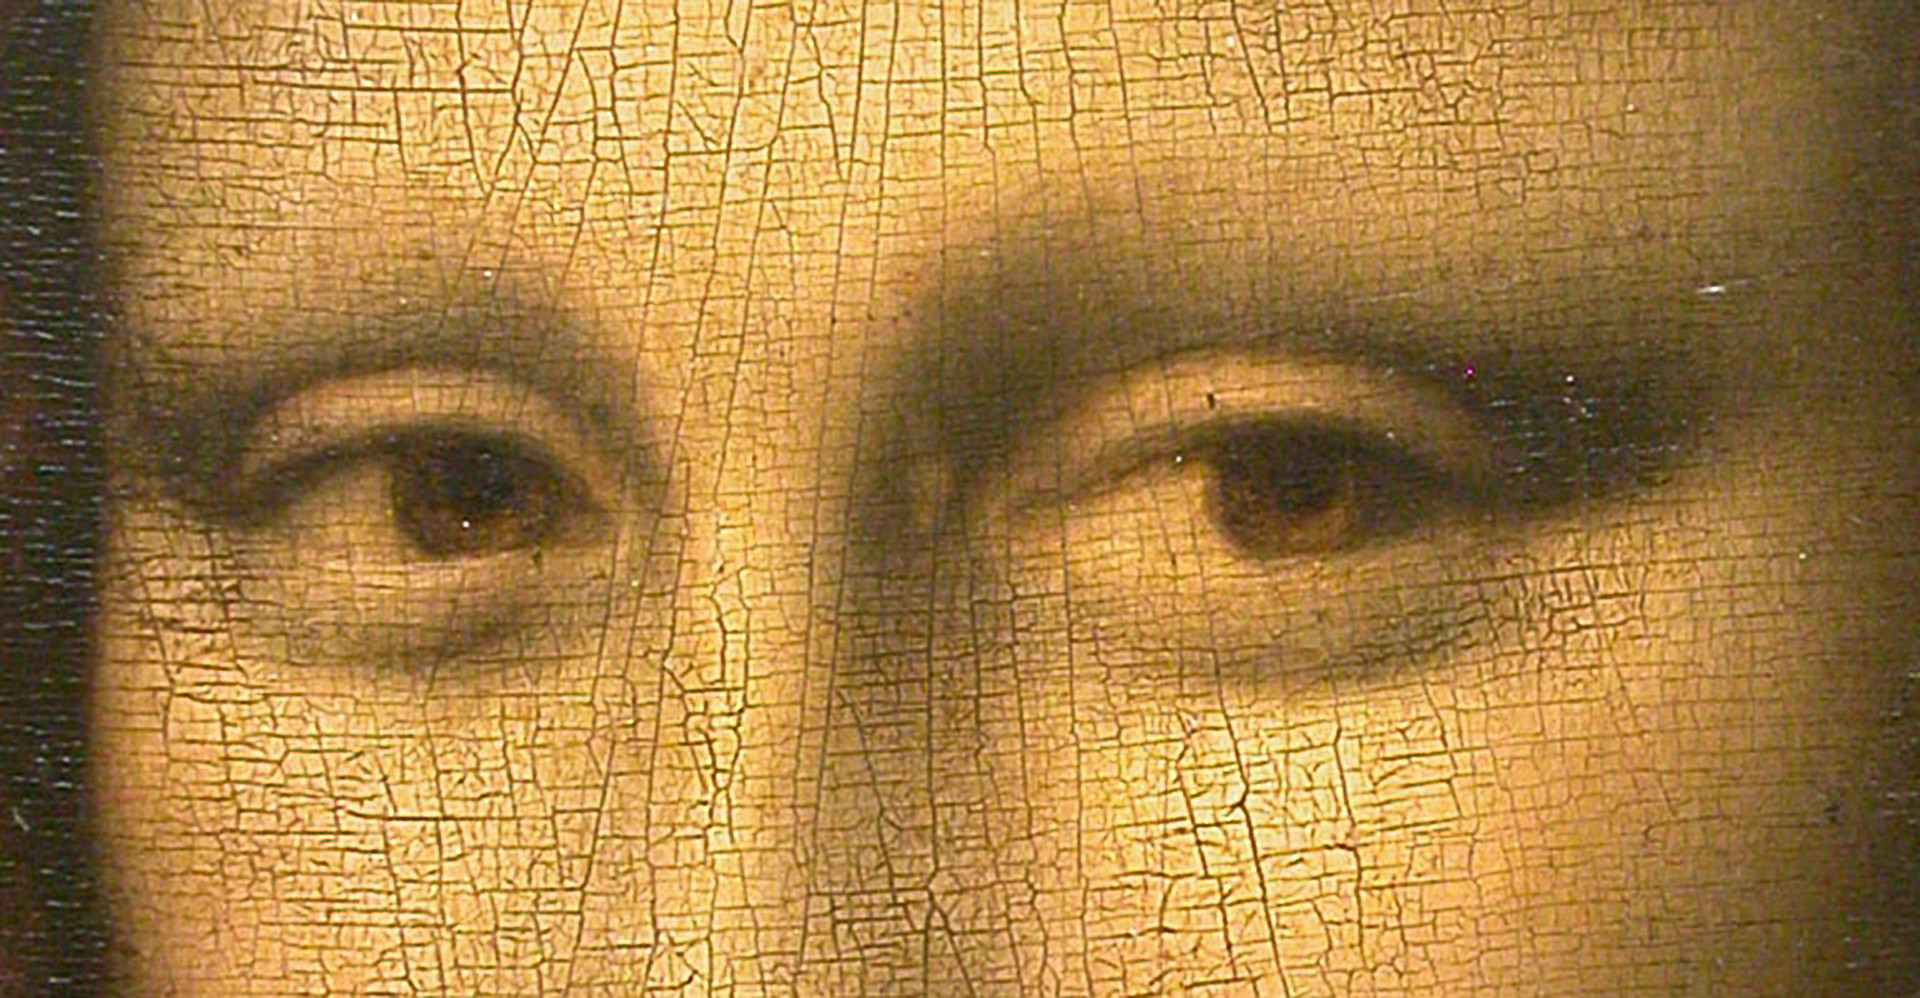 <p>According to Italian historian Silvano Vincenti, he claimed to have discovered hidden symbols in the eyes of the Mona Lisa that cannot be seen without assistance. These symbols include the initials "LV" in the right pupil, believed to be the painter's own.</p><p>You may also like:<a href="https://www.starsinsider.com/n/199449?utm_source=msn.com&utm_medium=display&utm_campaign=referral_description&utm_content=622678v1en-en"> Find out the richest and poorest suburbs of Australia</a></p>